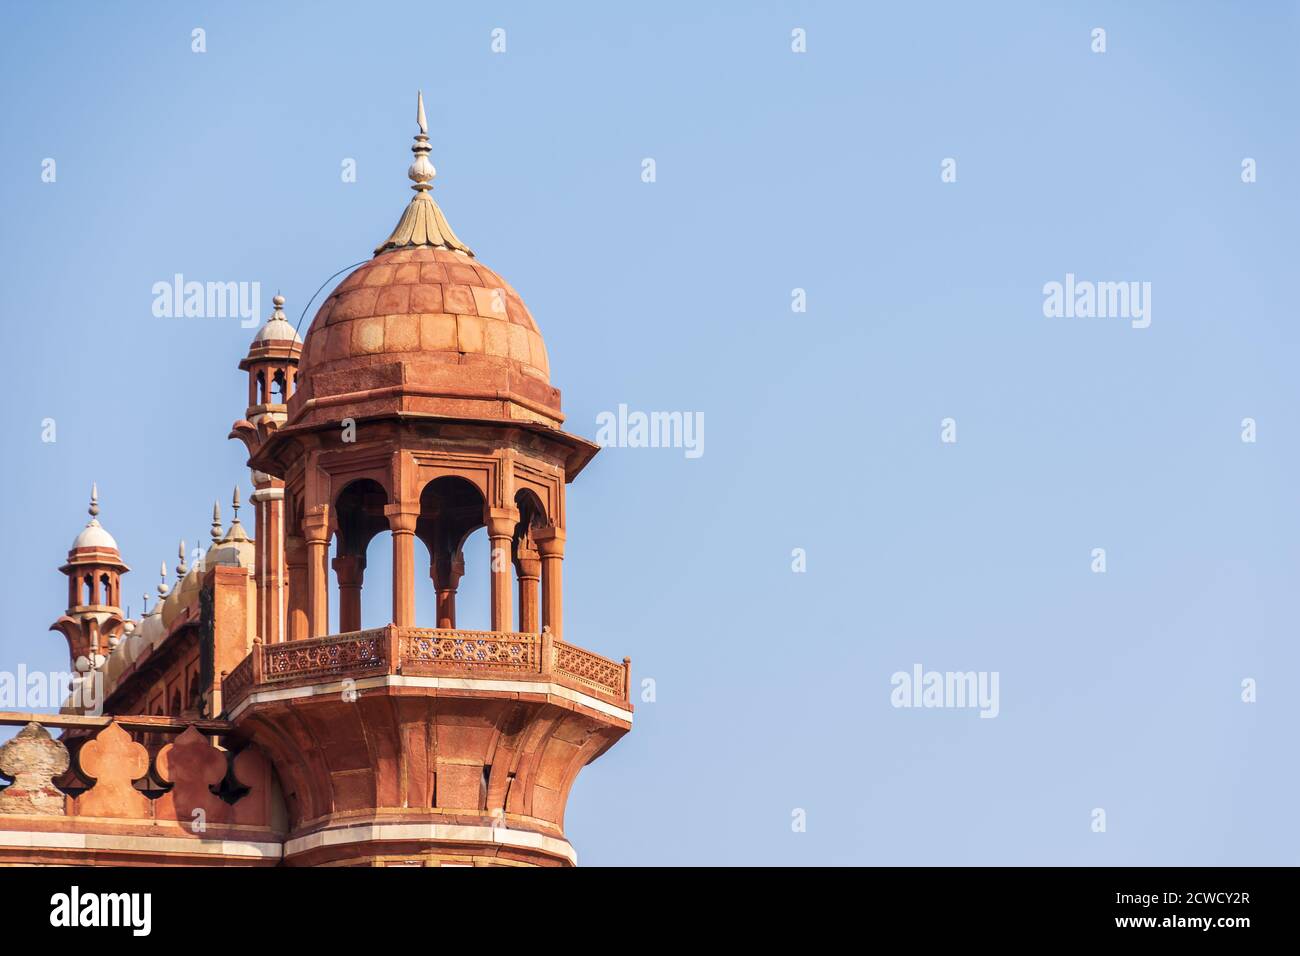 A view of a turret at Safdarjung's Tomb, a sandstone and marble mausoleum in New Delhi, India. Stock Photo